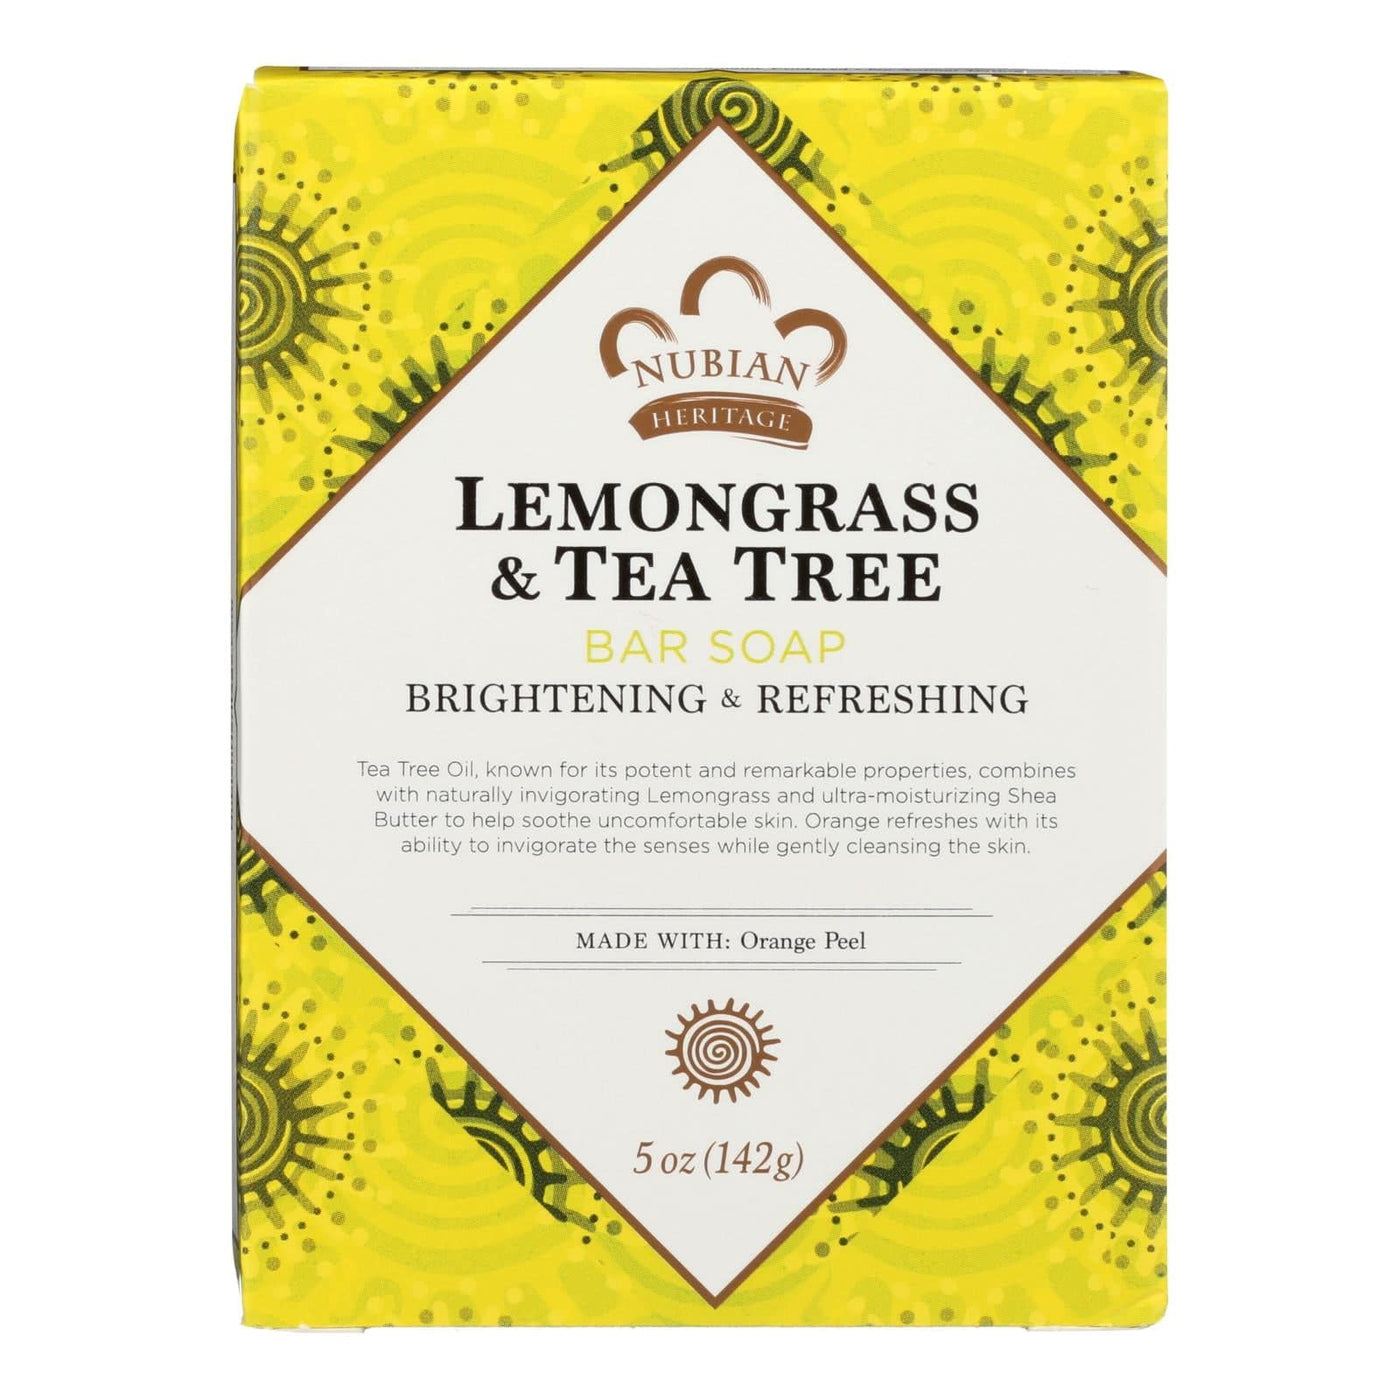 Buy Nubian Heritage Bar Soap Lemongrass And Tea Tree With Orange Peel - 5 Oz  at OnlyNaturals.us